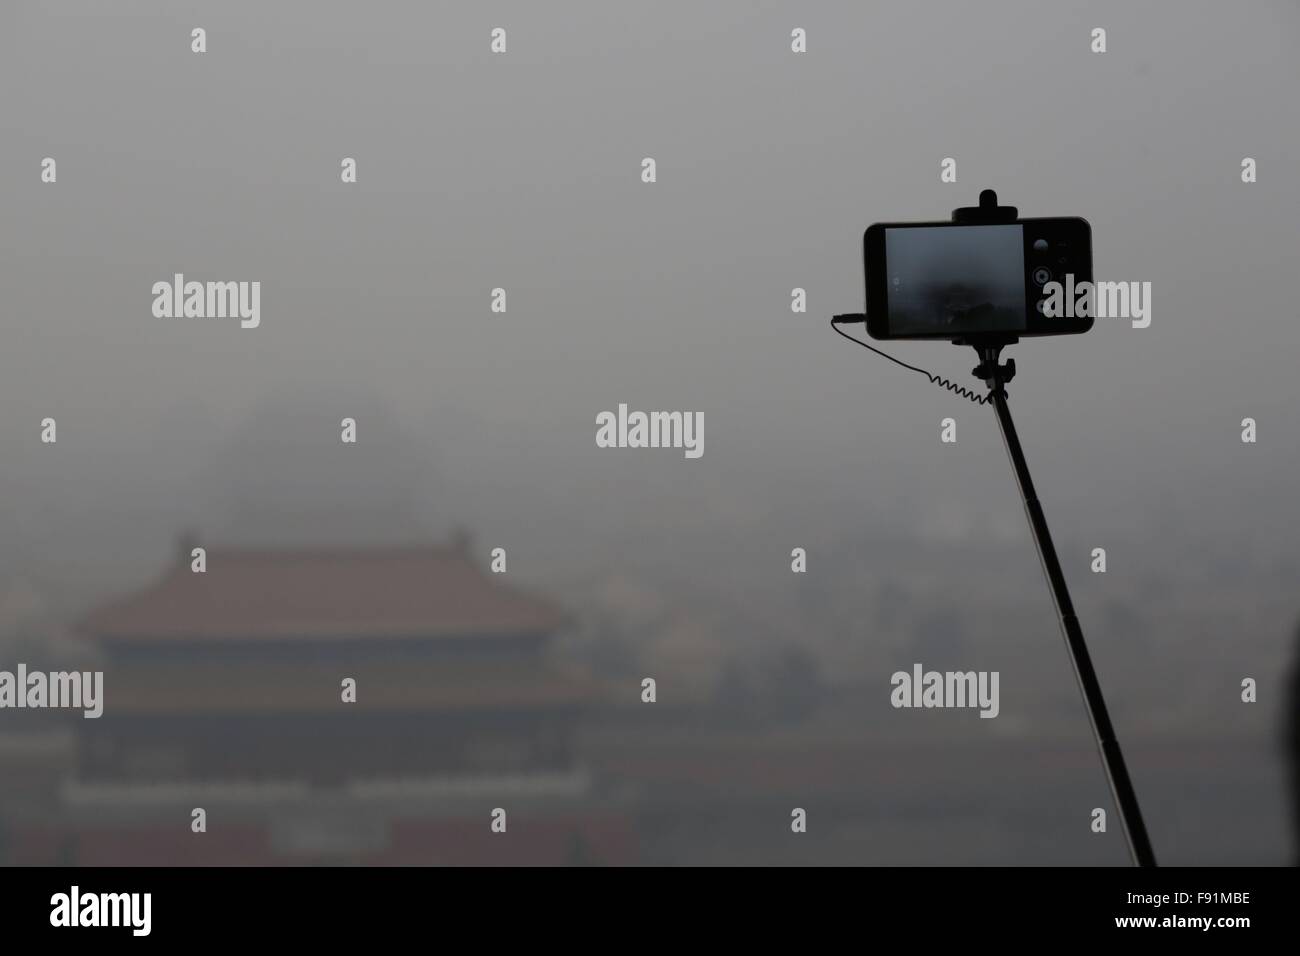 (151213) -- BEIJING, Dec. 13, 2015 (Xinhua) -- A tourist takes photo of the Forbidden City amid heavy smog at the Jingshan Park in Beijing, capital of China, Dec. 8, 2015. Under a red alert, the most serious level, the city's emergency management headquarters advised kindergartens, primary and high schools to suspend classes, banned outdoor operations on construction sites and required some industrial plants to limit or stop production. Car use was limited during the red alert period as cars are allowed on the roads on alternating days depending on the odd or even numbers of their license plat Stock Photo